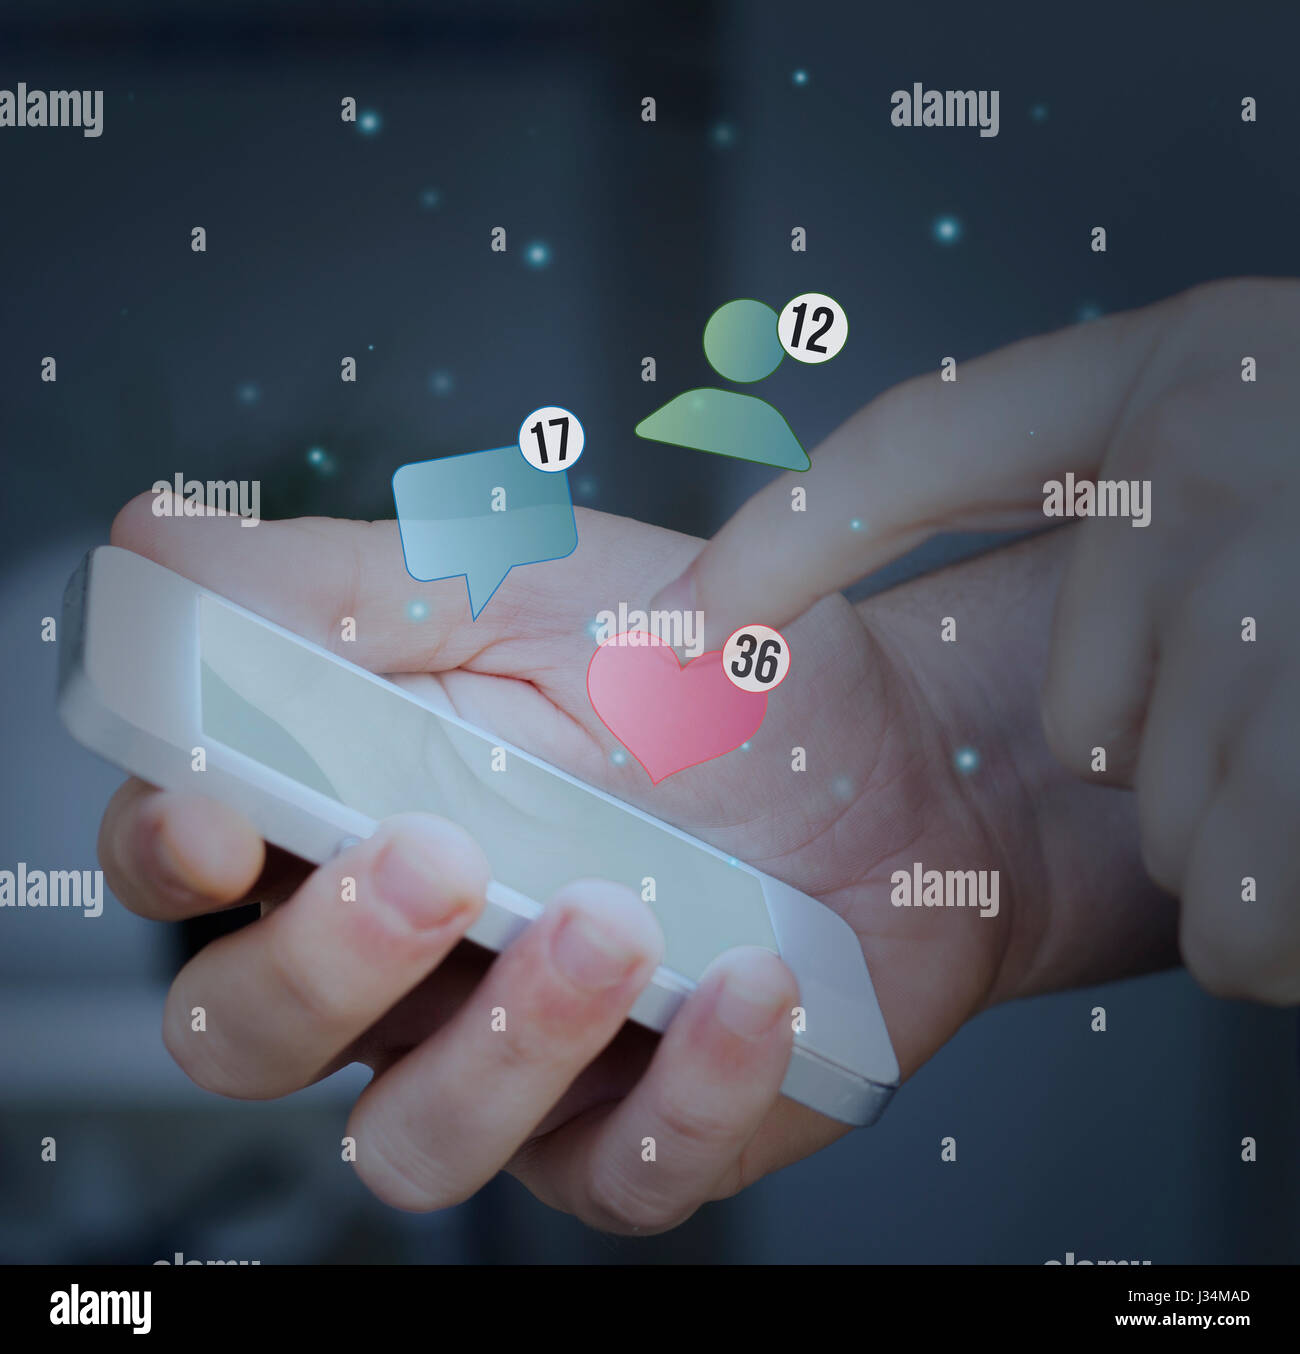 Finger touching a smartphone screen. social stats concept. Stock Photo